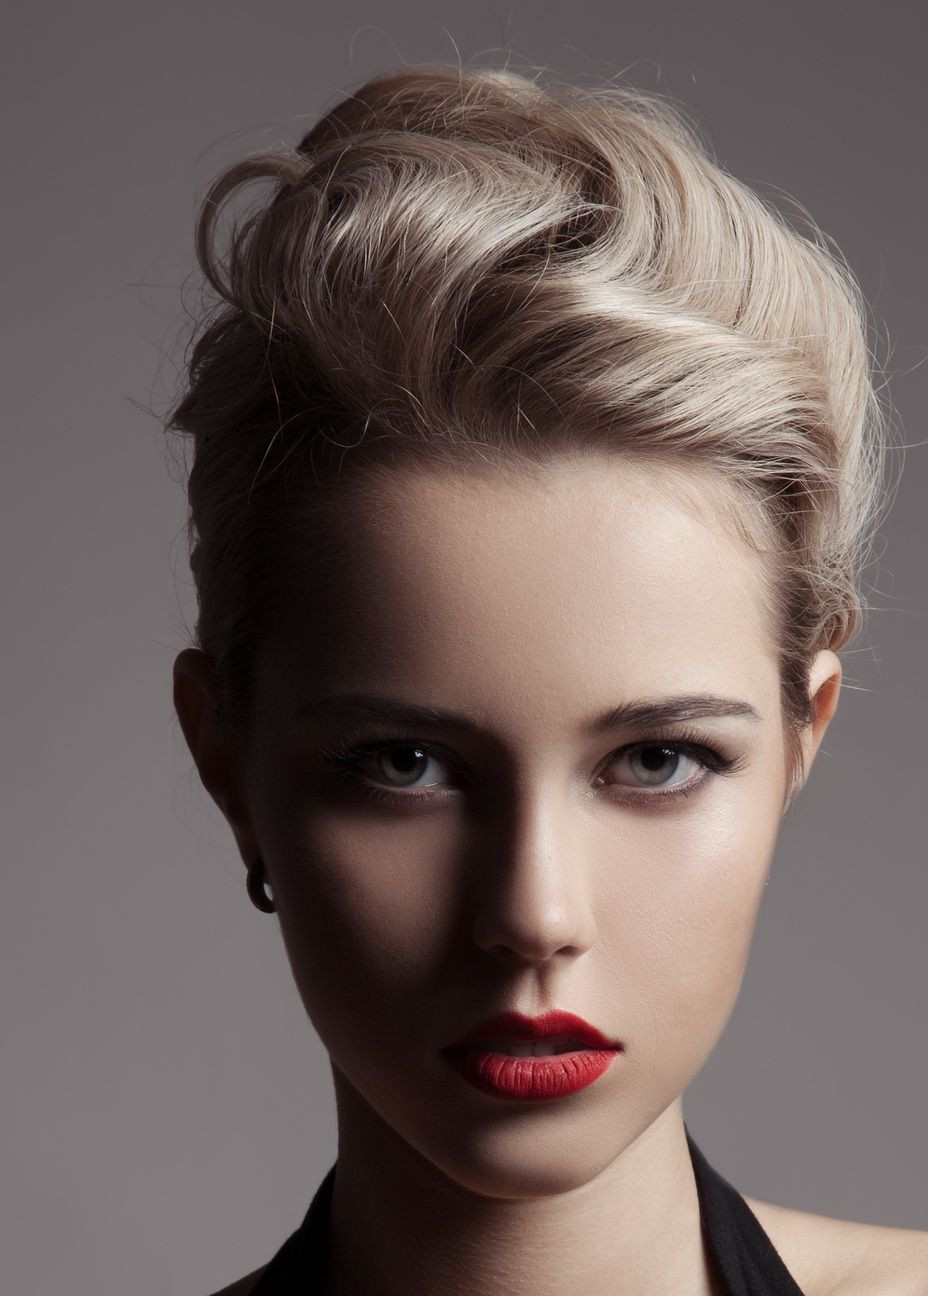 Classical Hairstyles For Women
 30 Classic Short Hairstyles to Always Look Trendy